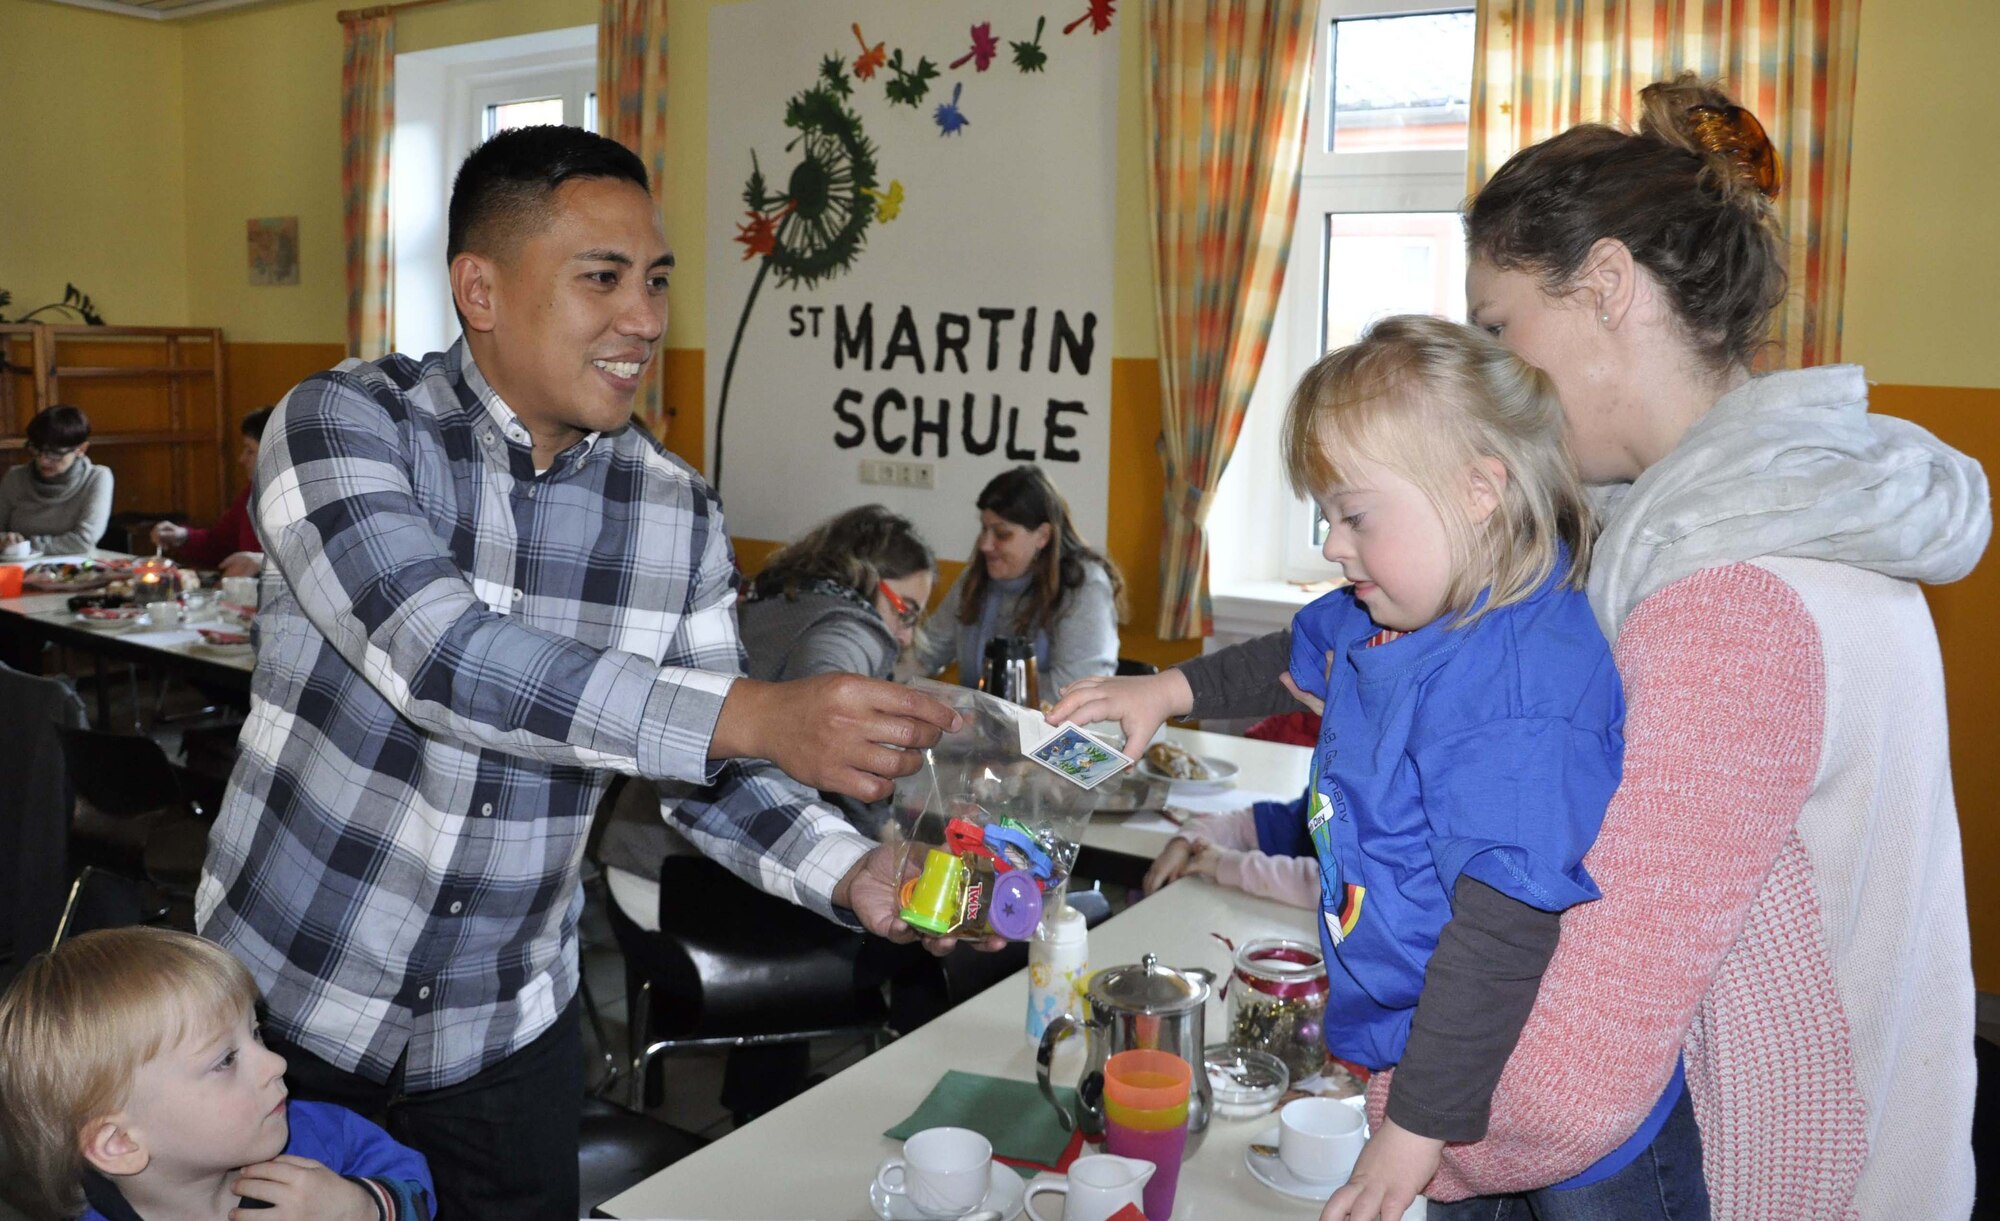 A member of the 52nd Civil Engineer Squadron hands out a gift to a child at the Bitburg Saint Martin school, Dec. 5, during the school’s annual Sankt Nicholas celebration. The event included a visit by Sankt Nicholas, dances and singing performances by the children, as well as a gift presentation by the 52nd Fighter Wing. The celebration was attended by Saint Martin school officials, parents, 52nd Fighter Wing leadership spouses, as well as Airmen and civilians from the wing, who provided gifts to students and kindergarten children.  In the summer, Spangdahlem Sabers invited the Saint Martin school to Special Children’s Day at Spangdahlem AB, where they played games and spent a fun-filled time together. (U.S. Air Force photo by Iris Reiff)